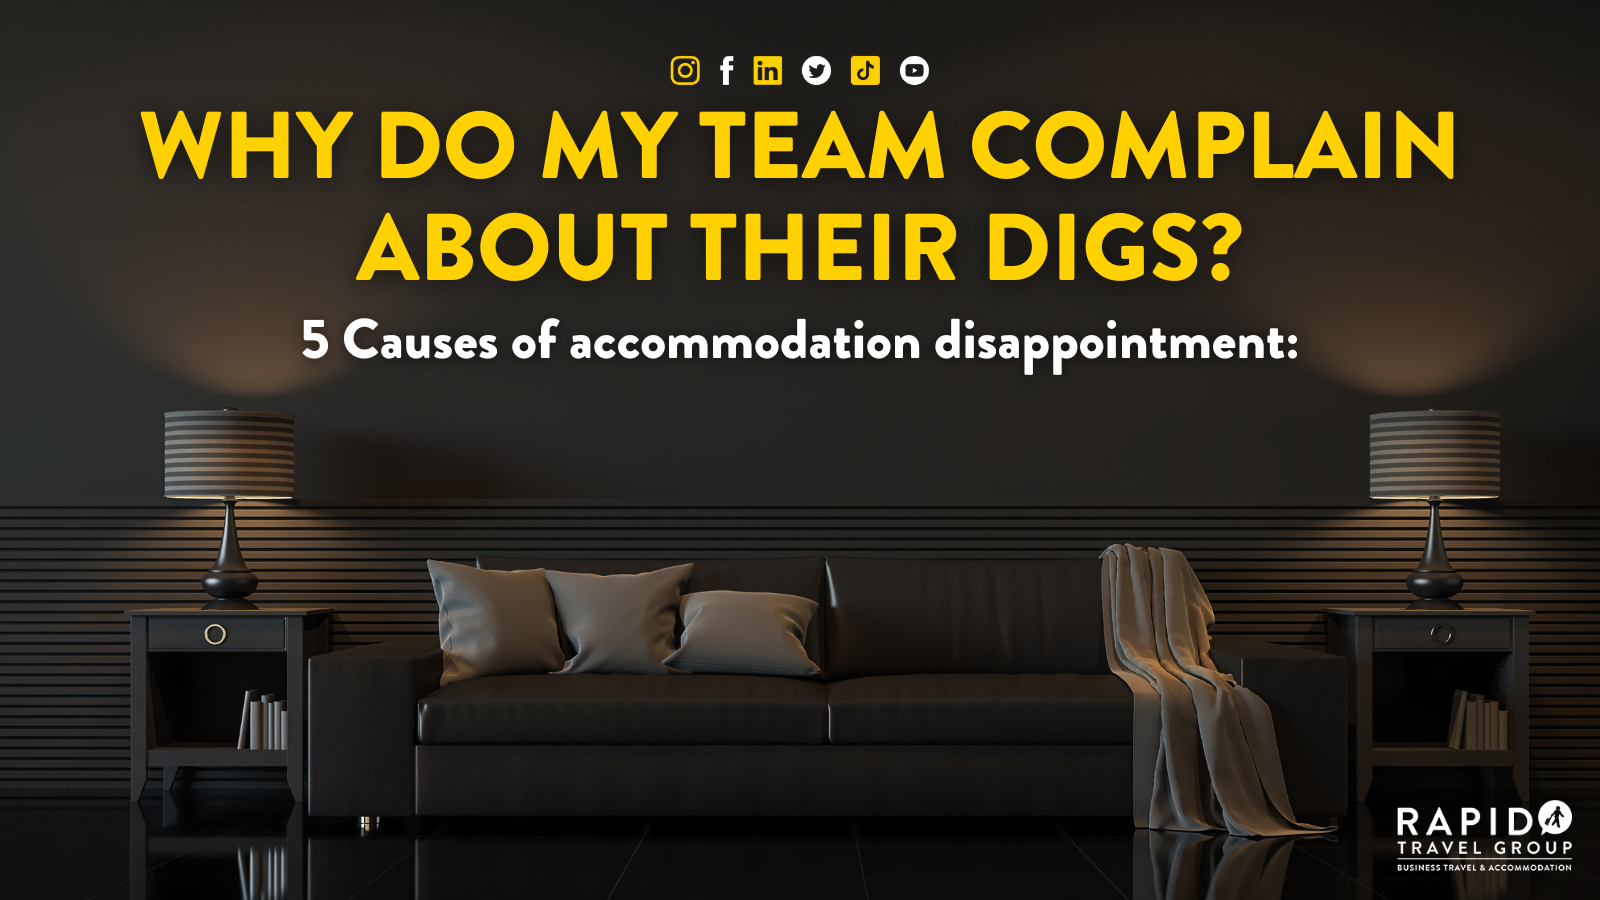 Why do my team complain about their digs? 5 Causes of accommodation disappointment: